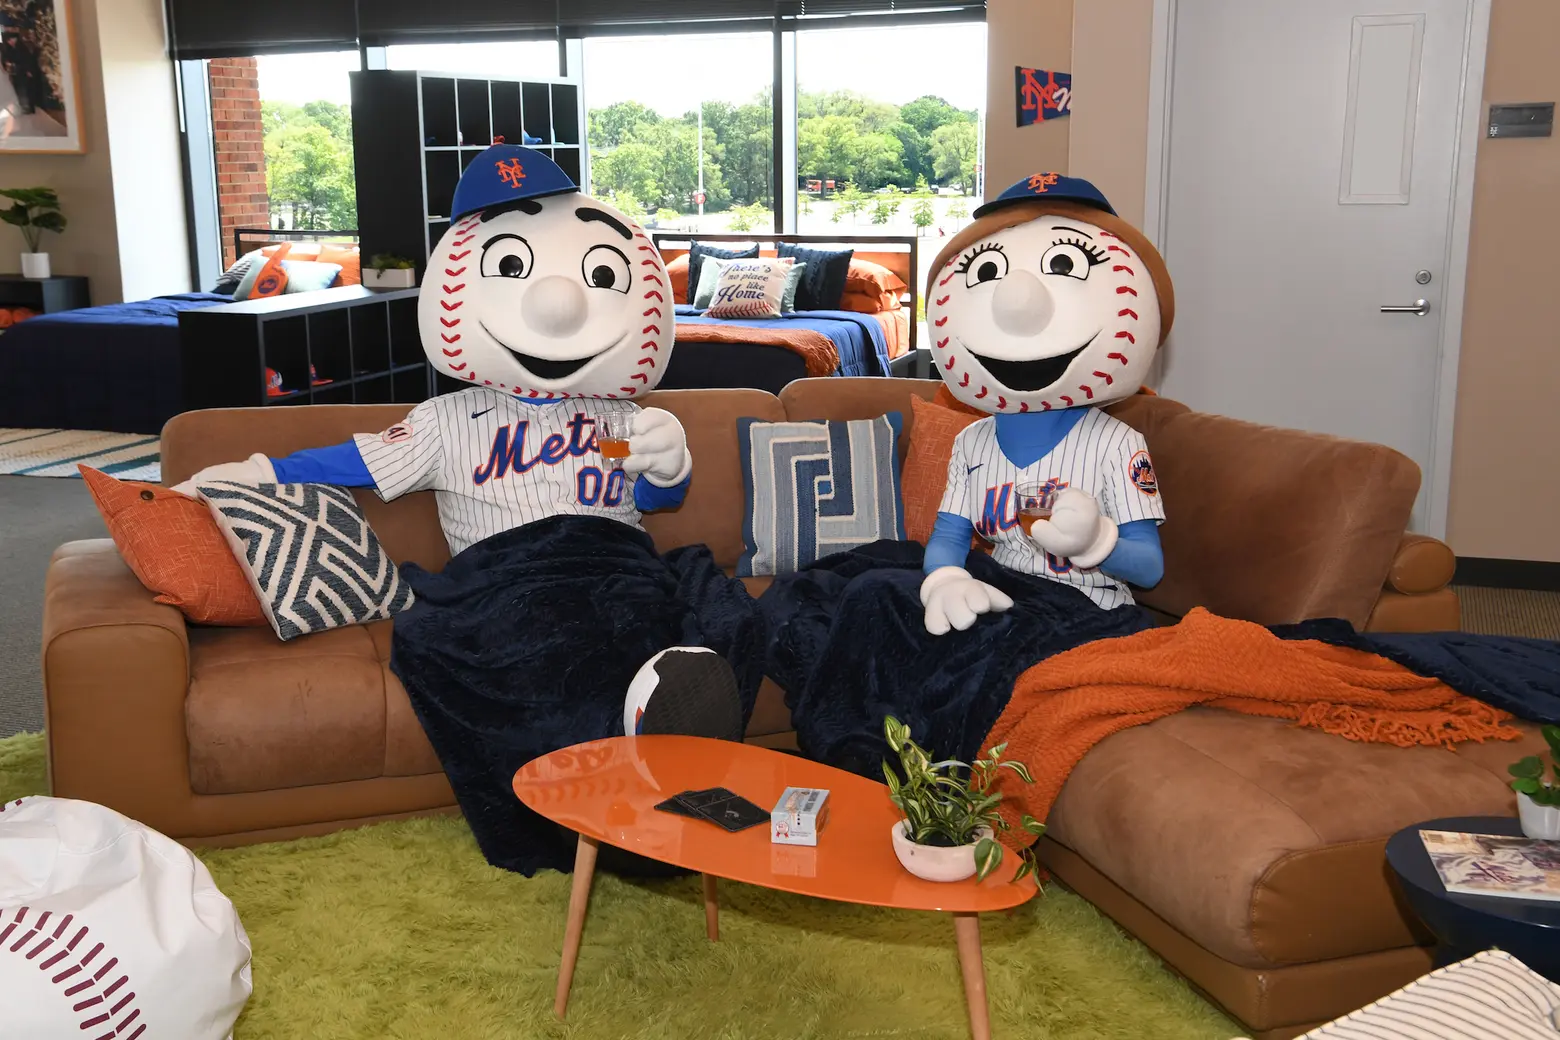 The Mets and Airbnb team up to offer baseball fans an overnight stay at Citi Field